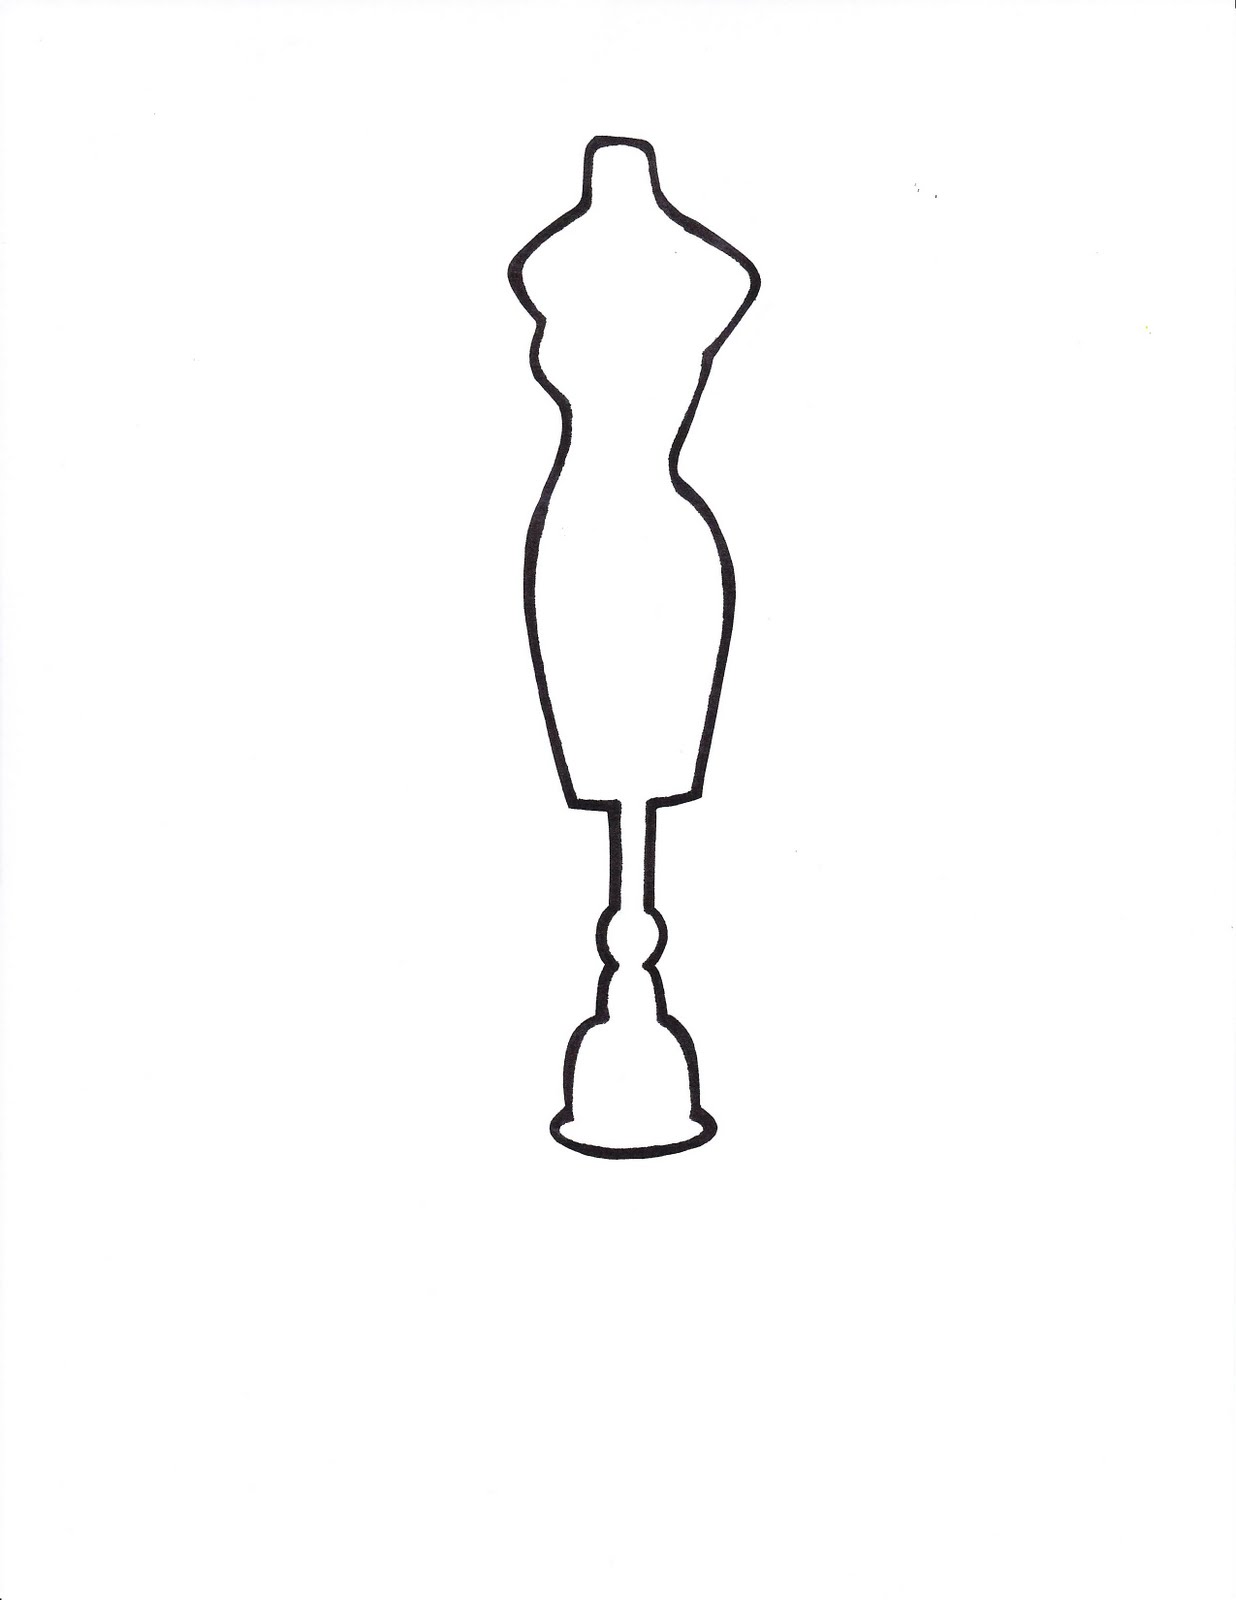 Dress Form Silhouette Clip Art at GetDrawings | Free download